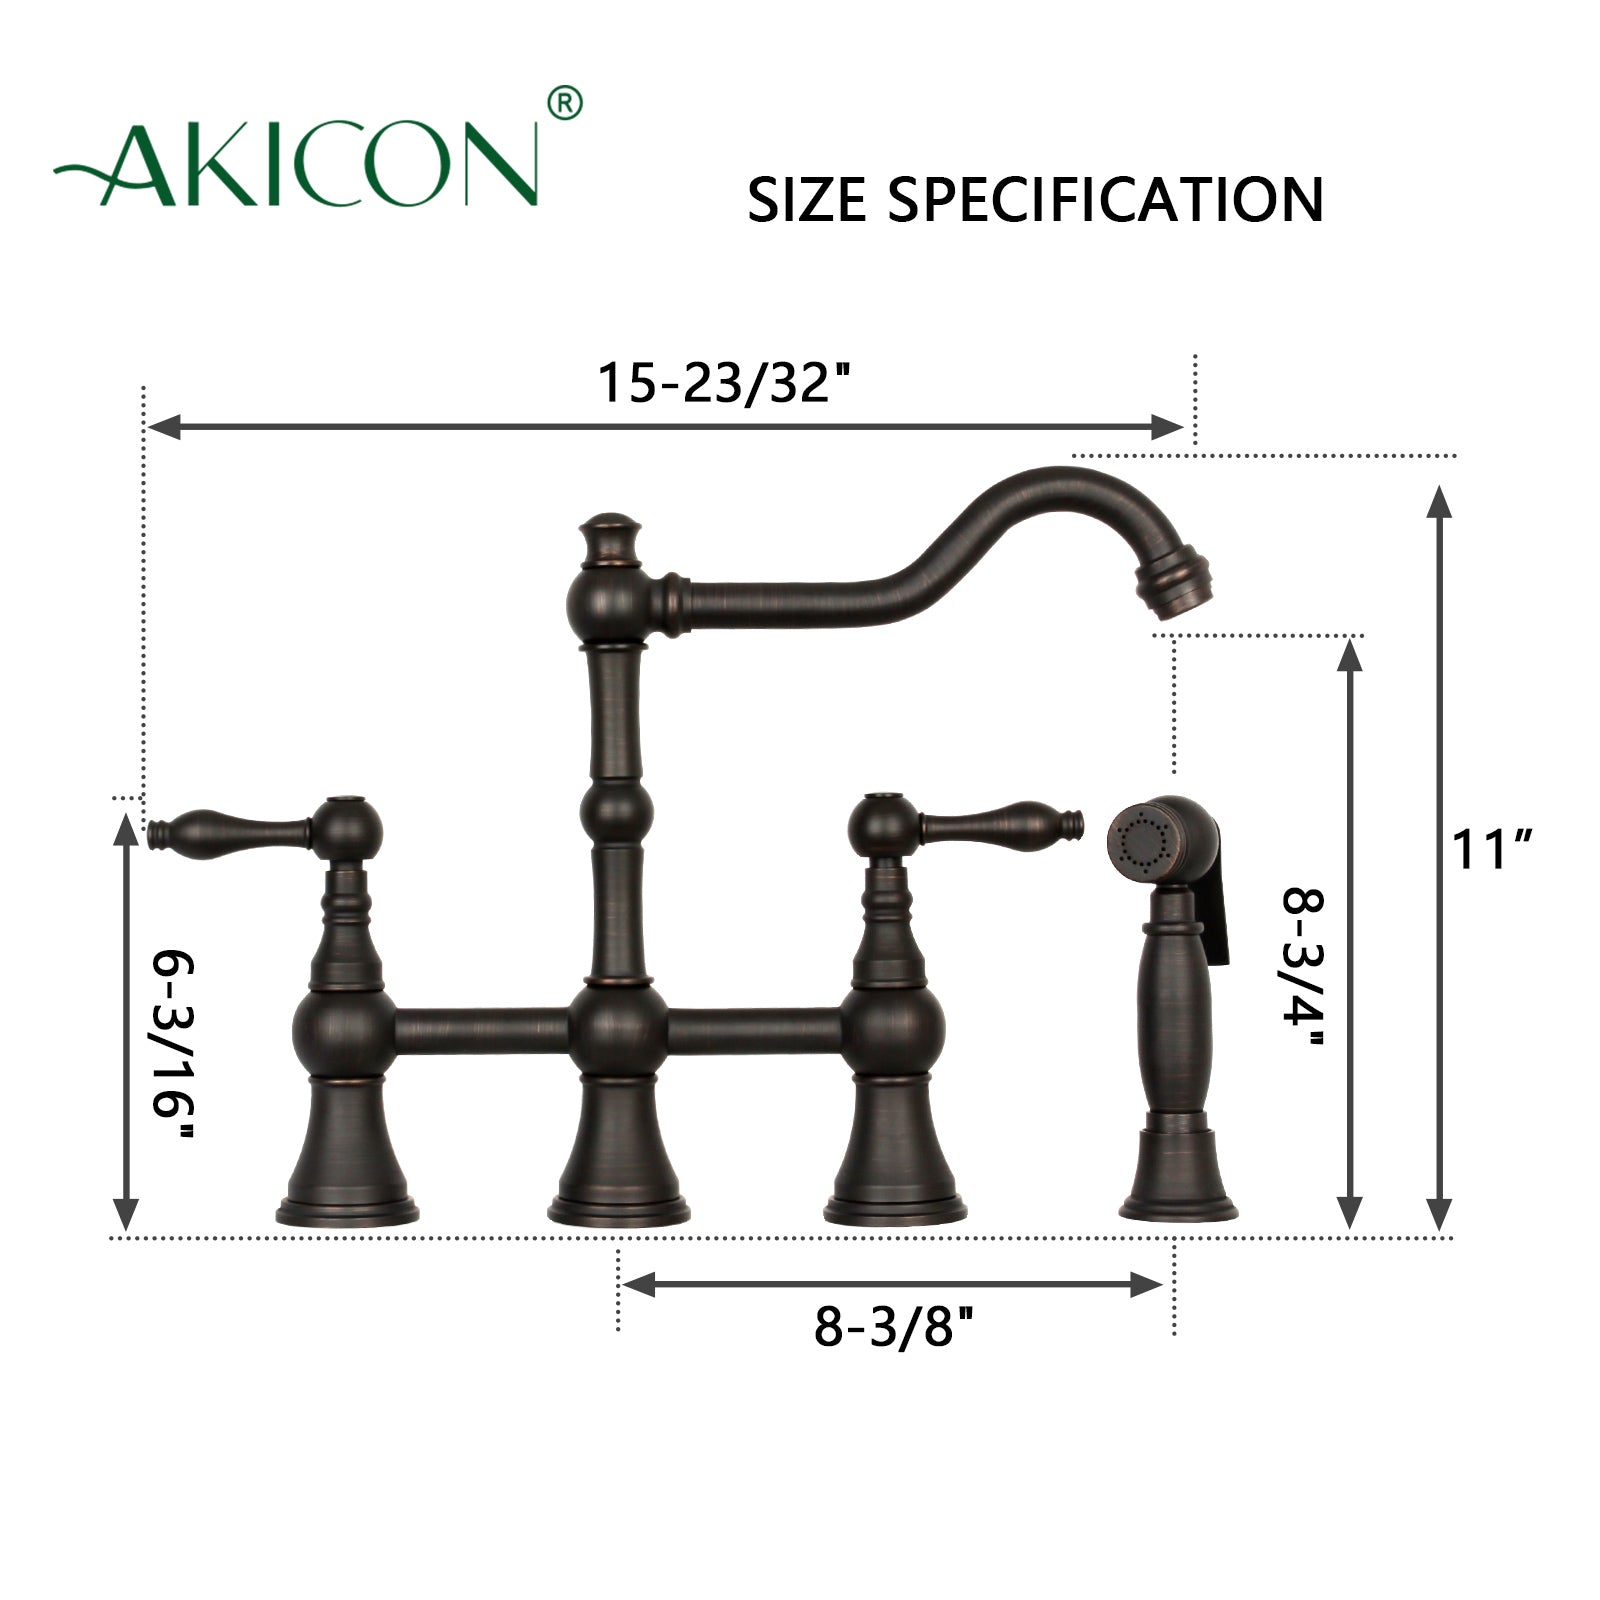 Two-Handles Oil Rubbed Bronze Bridge Kitchen Faucet with Side Sprayer - AK96718-ORB